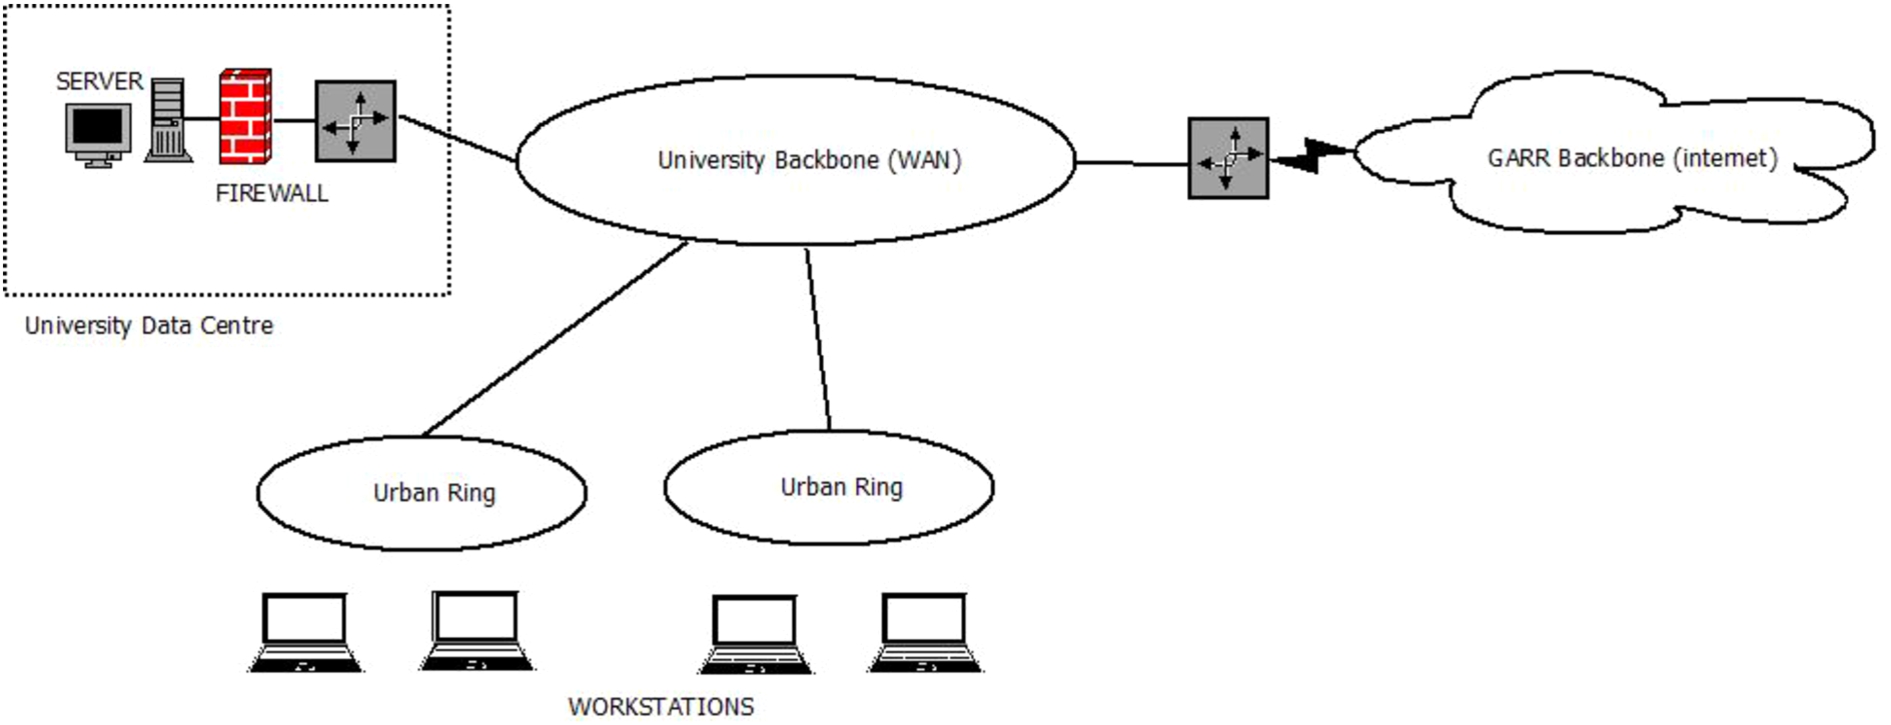 The university network: topology and components.